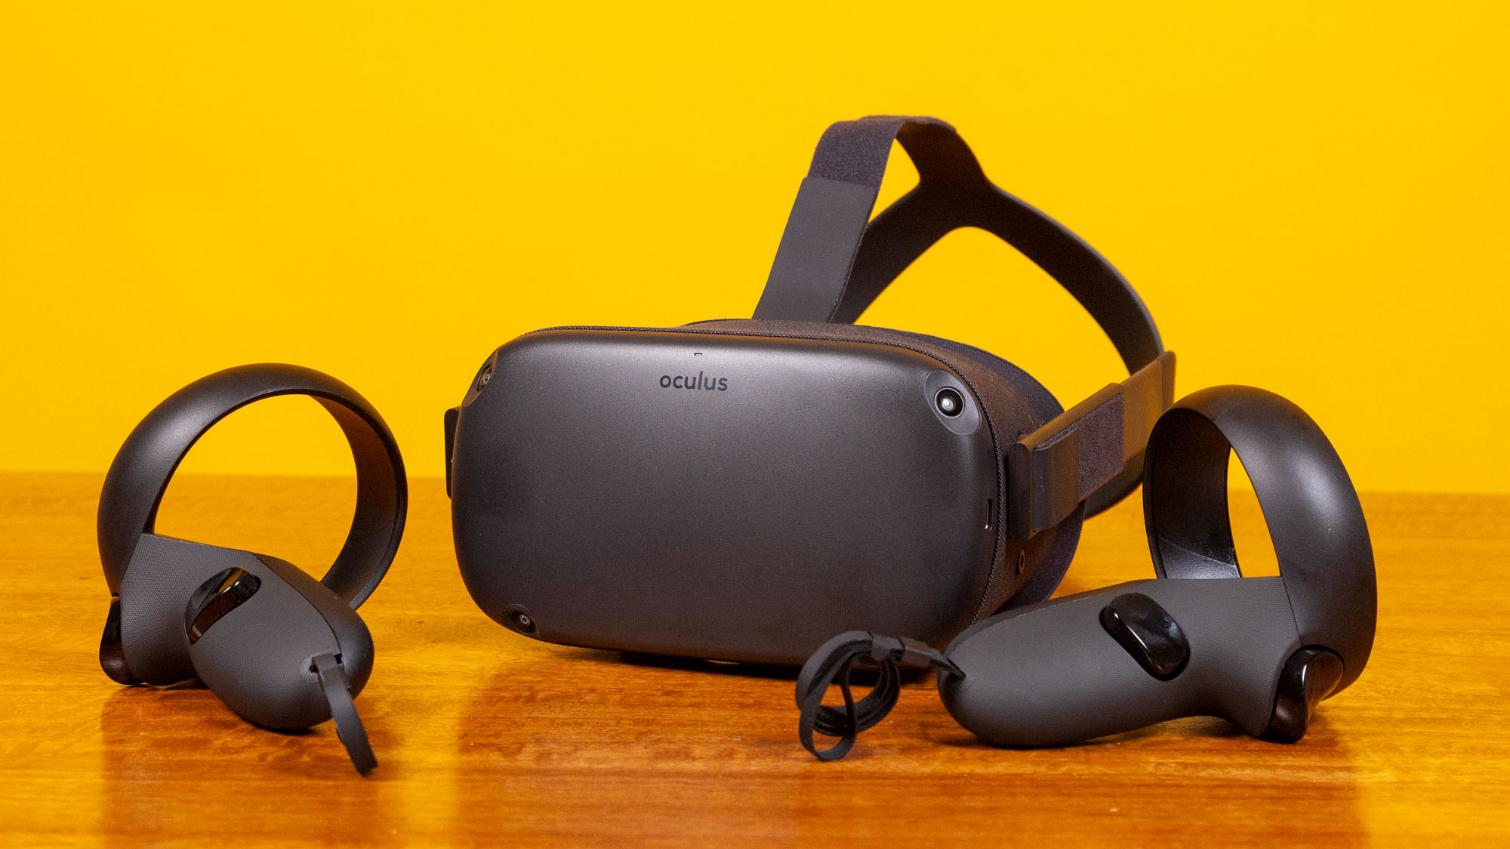 How to Pre-order the Oculus Quest and Rift S